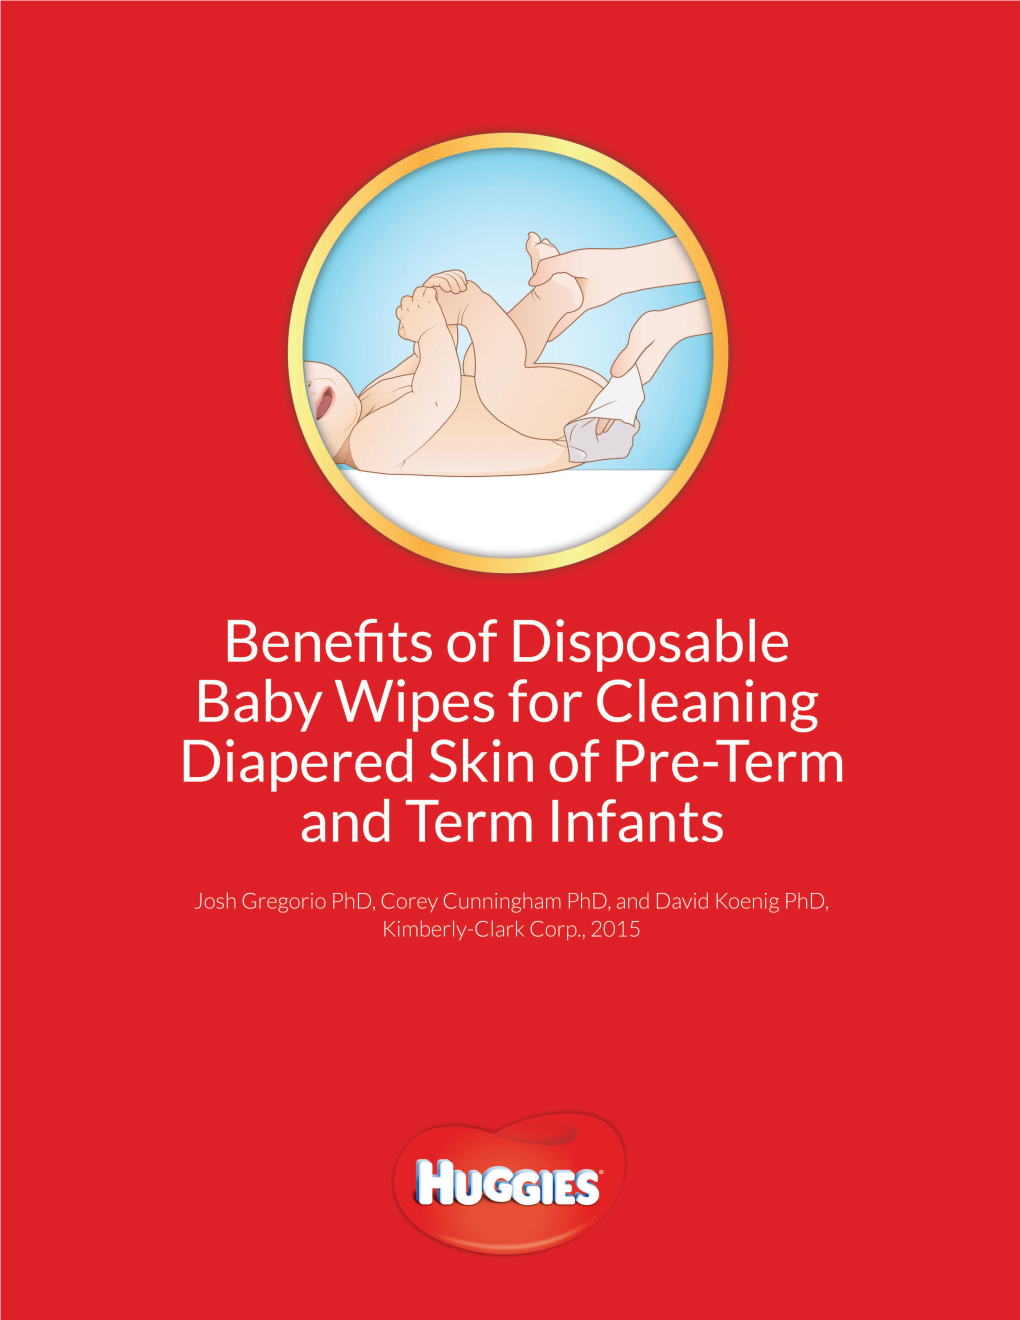 Benefits of Disposable Baby Wipes for Cleaning Diapered Skin of Pre-Term and Term Infants